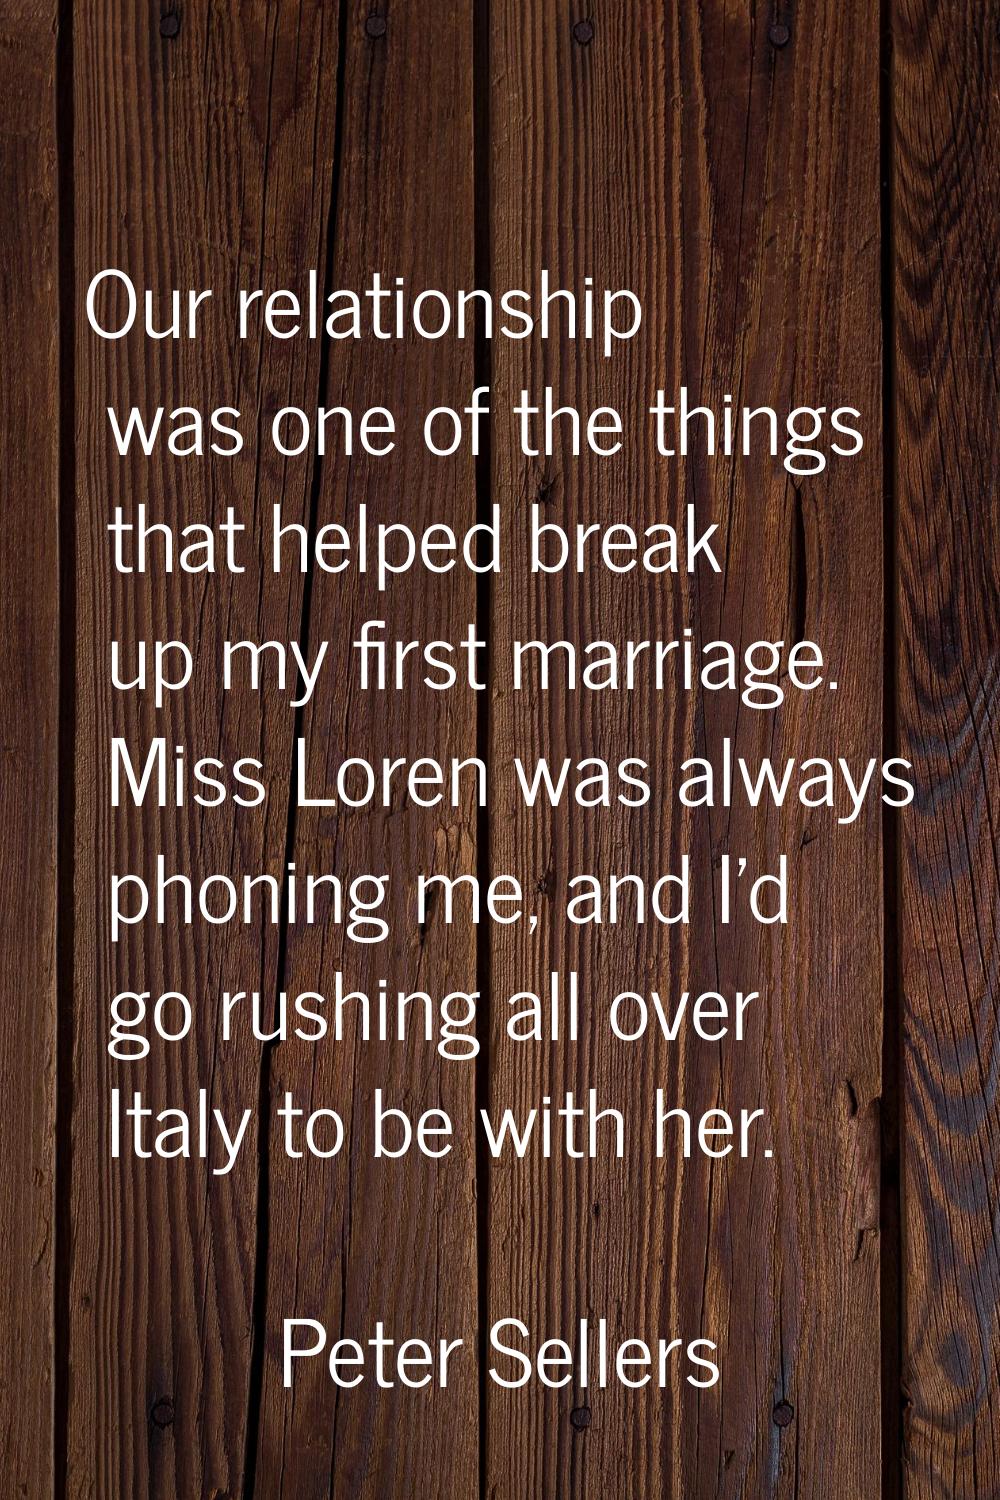 Our relationship was one of the things that helped break up my first marriage. Miss Loren was alway